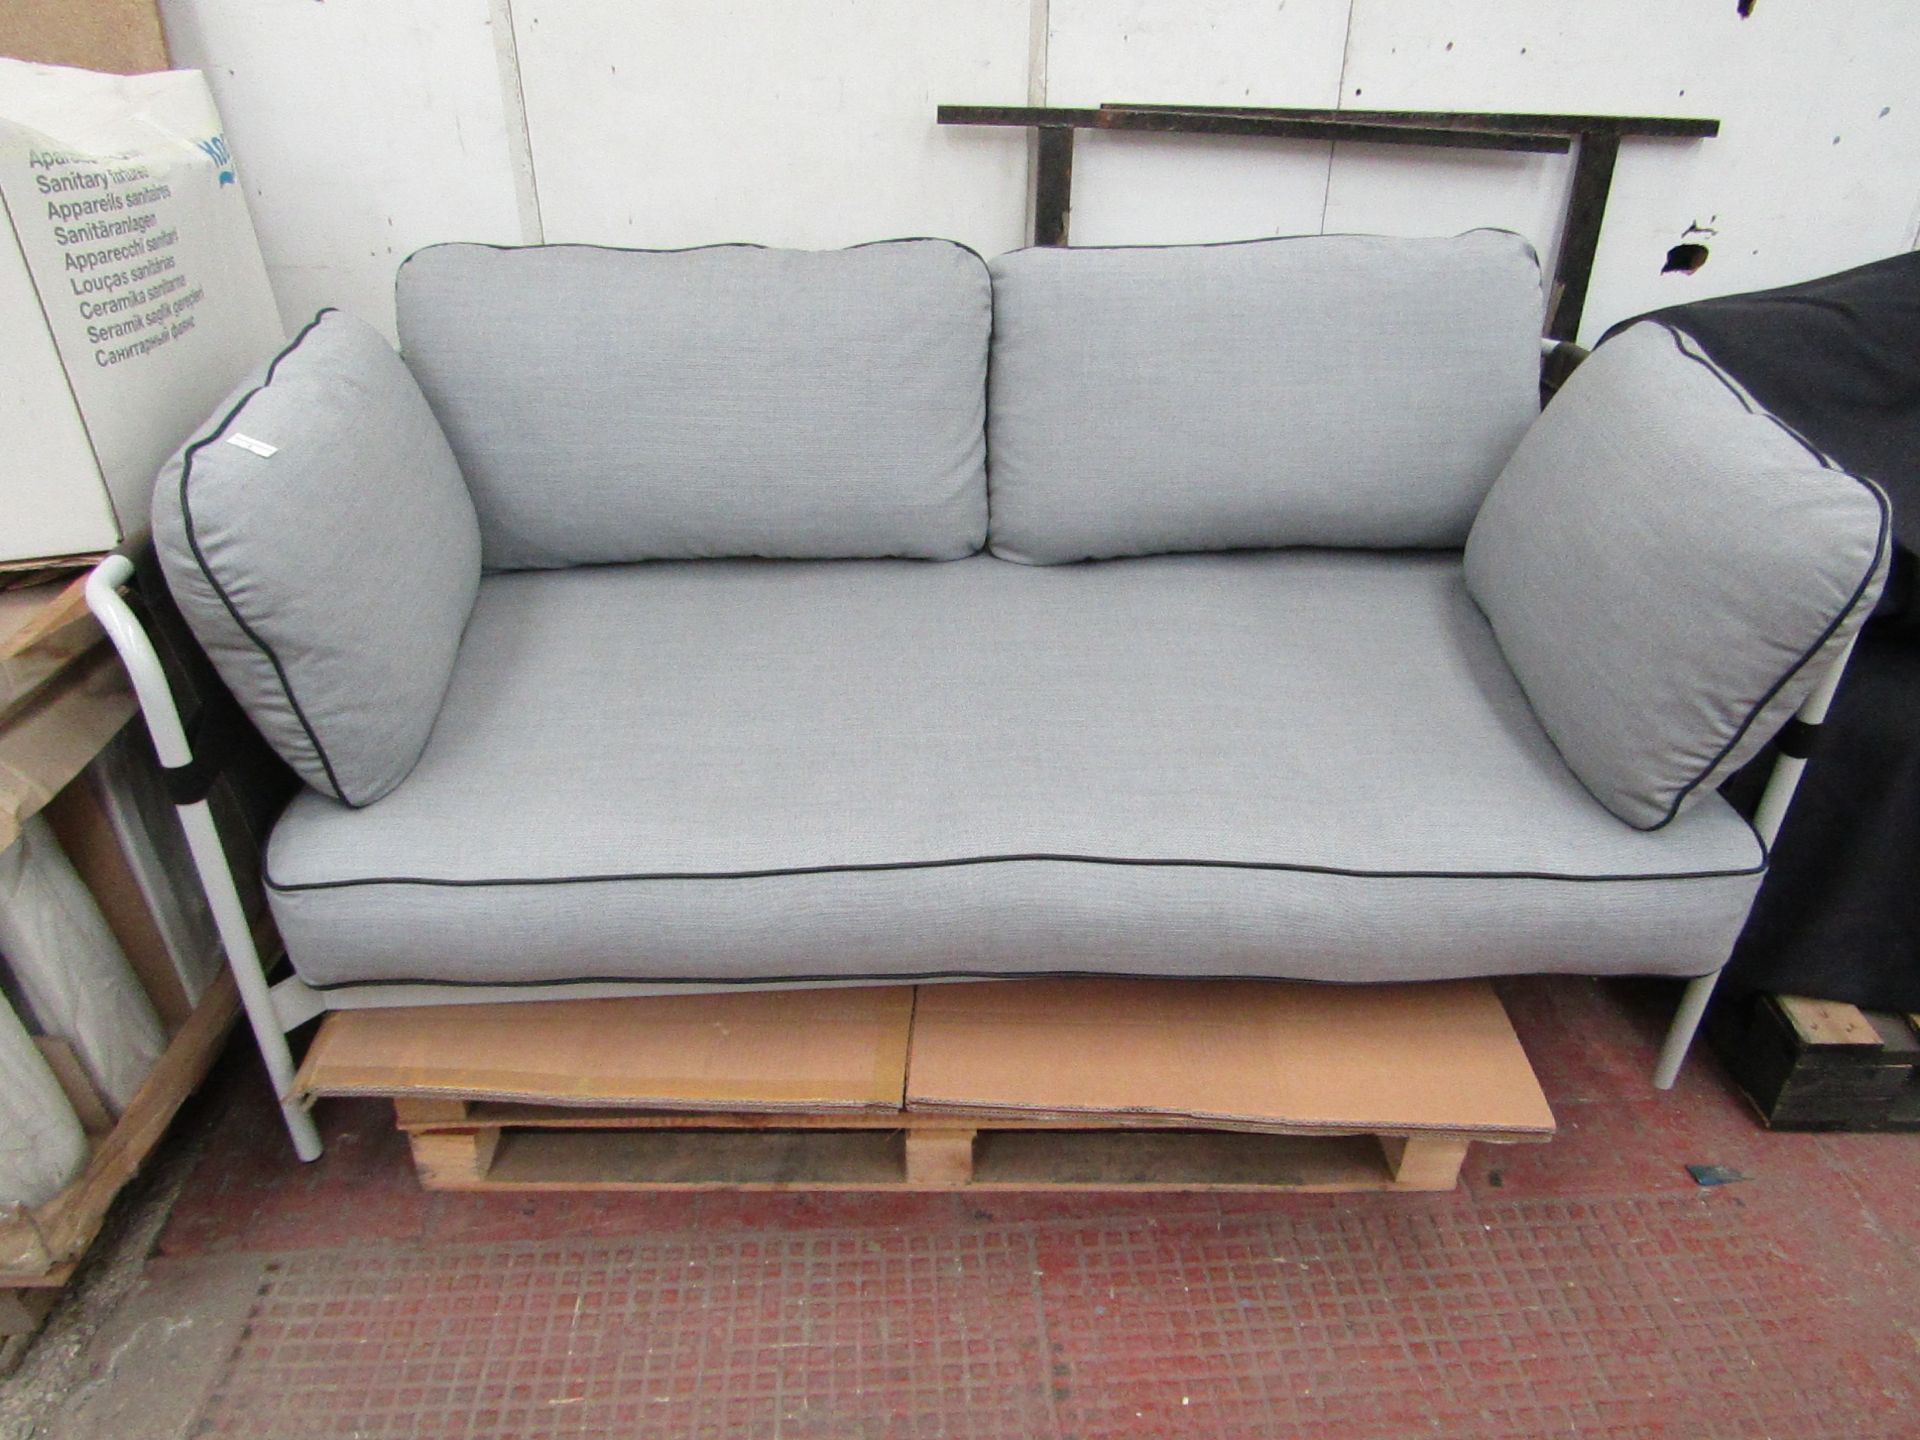 | 1X | HAY CAN 2 SEATER SOFA | LOOKS LIKE EX DISPLAY, MAY HAVE MINOR MARKS BU GOOD CONDITION OVERALL